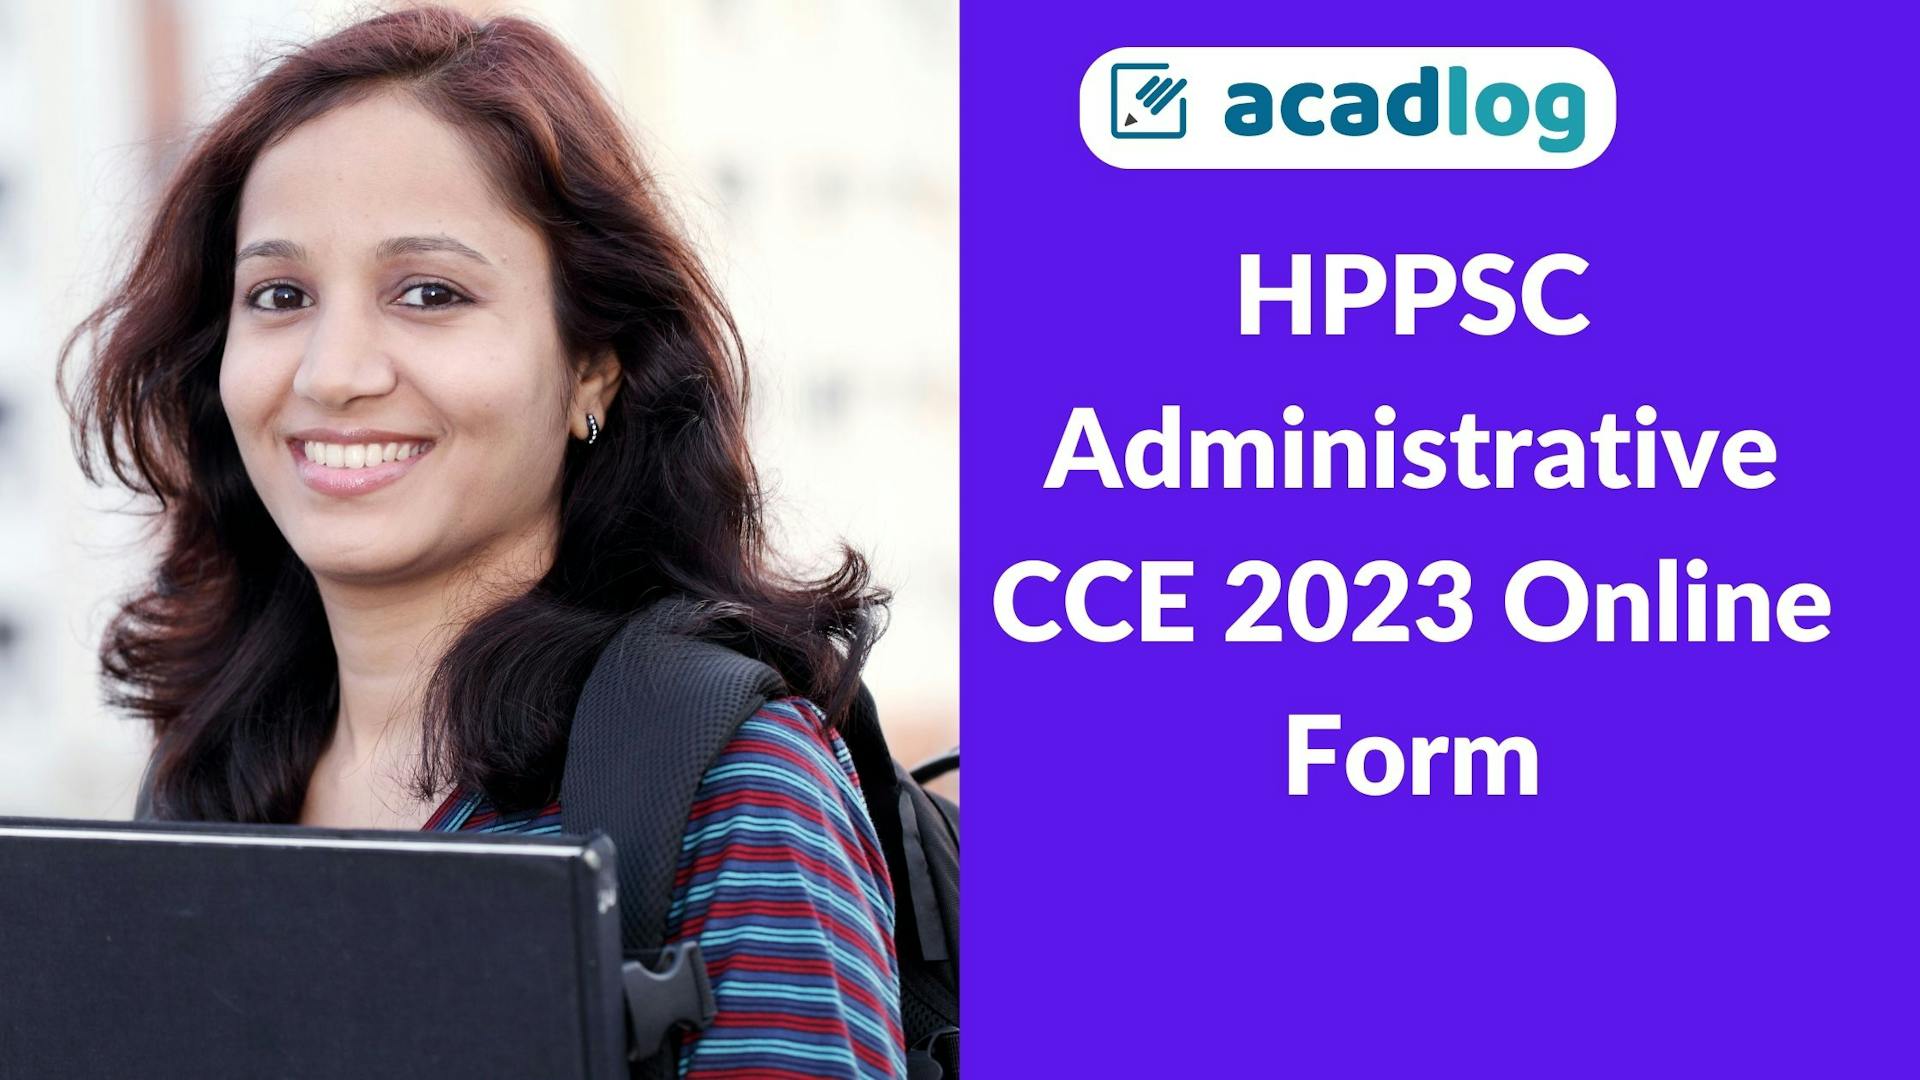 HPPSC Administrative CCE 2023 Online Form